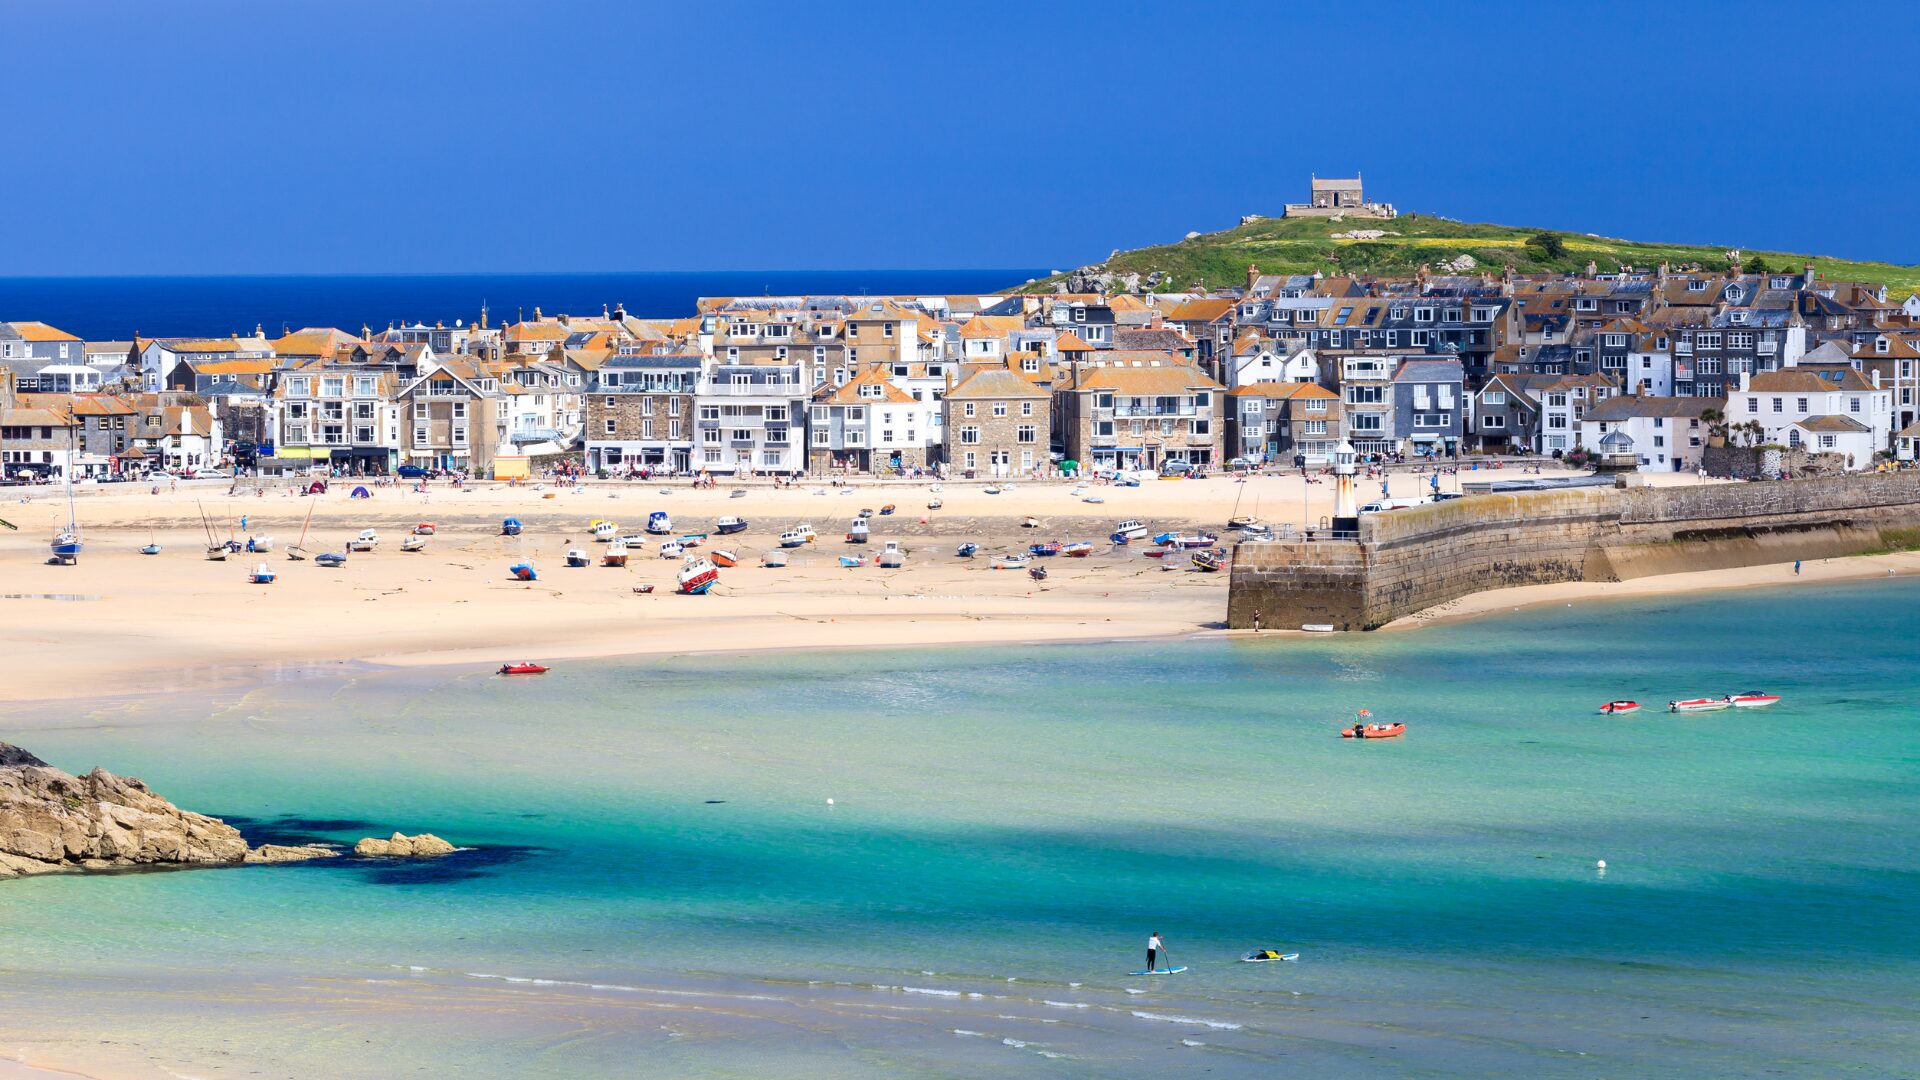 An aerial shot of holiday let properties overlooking the sunny beach in St Ives, Cornwall.